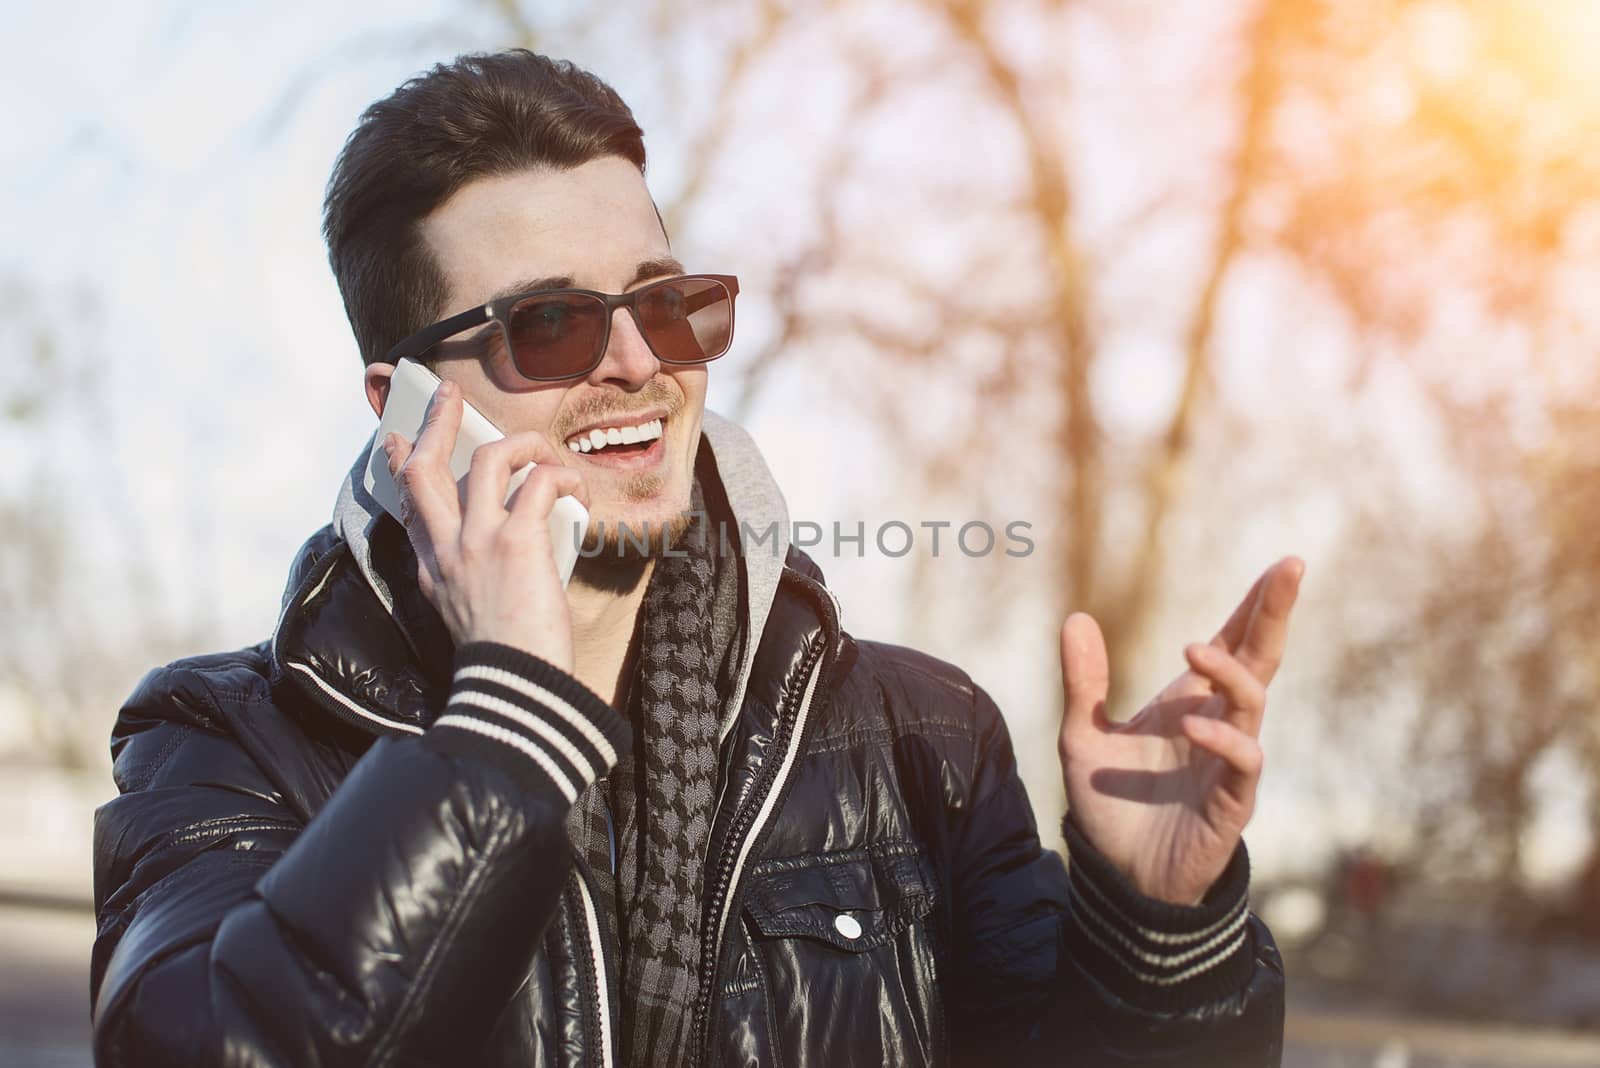 A Guy in a warm jacket with a smartphone in his hands, a sunny day.